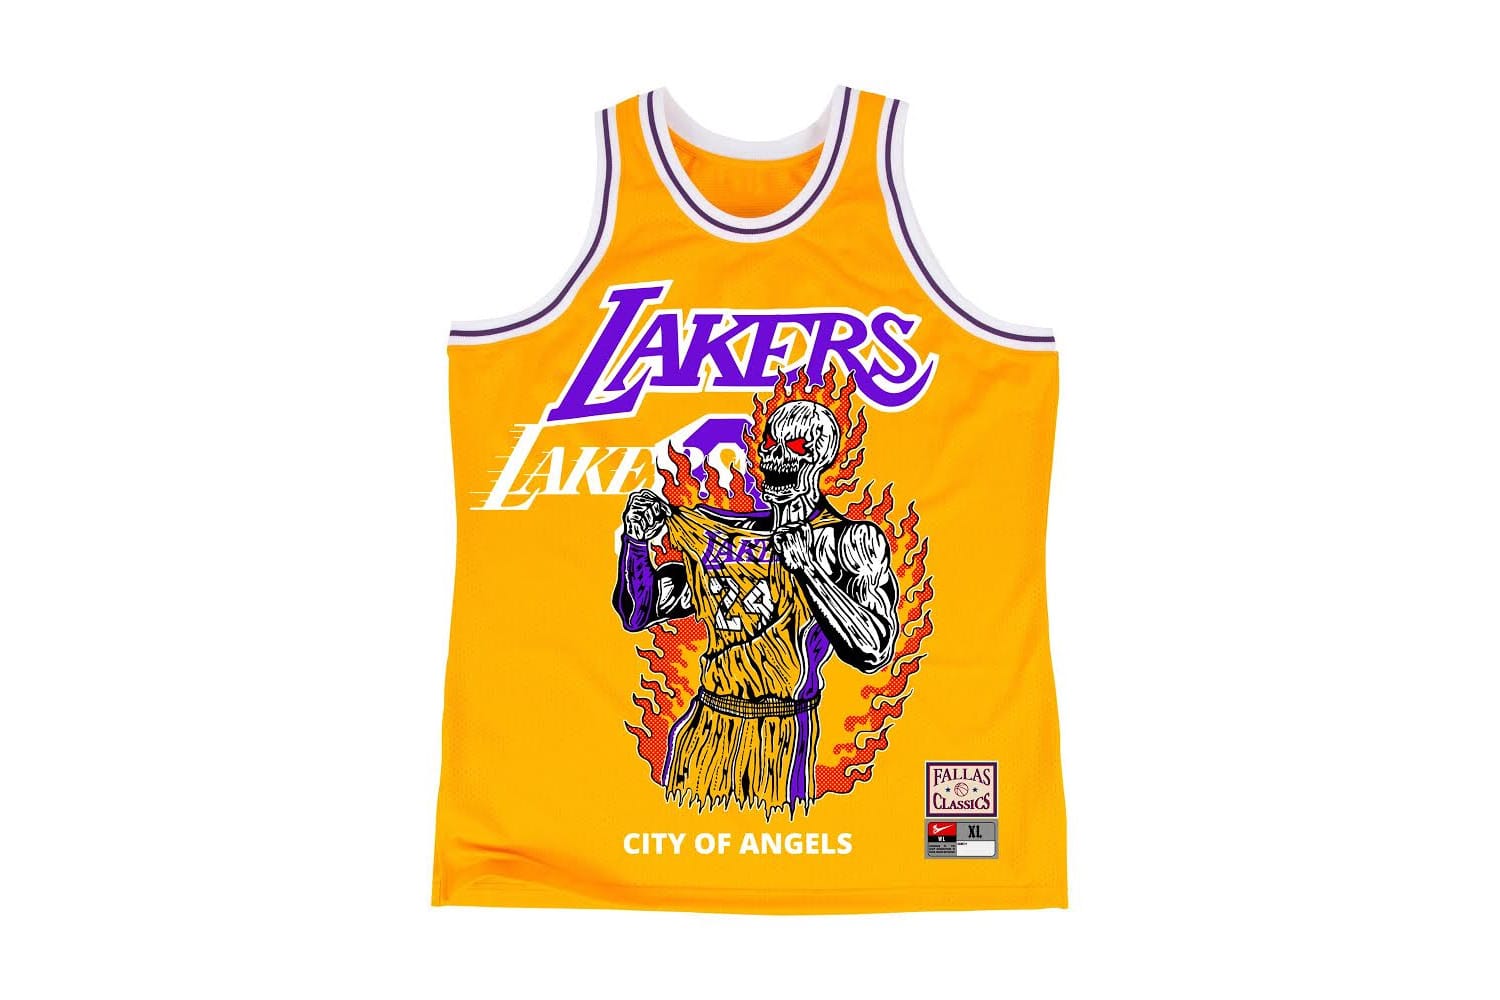 official lakers jersey